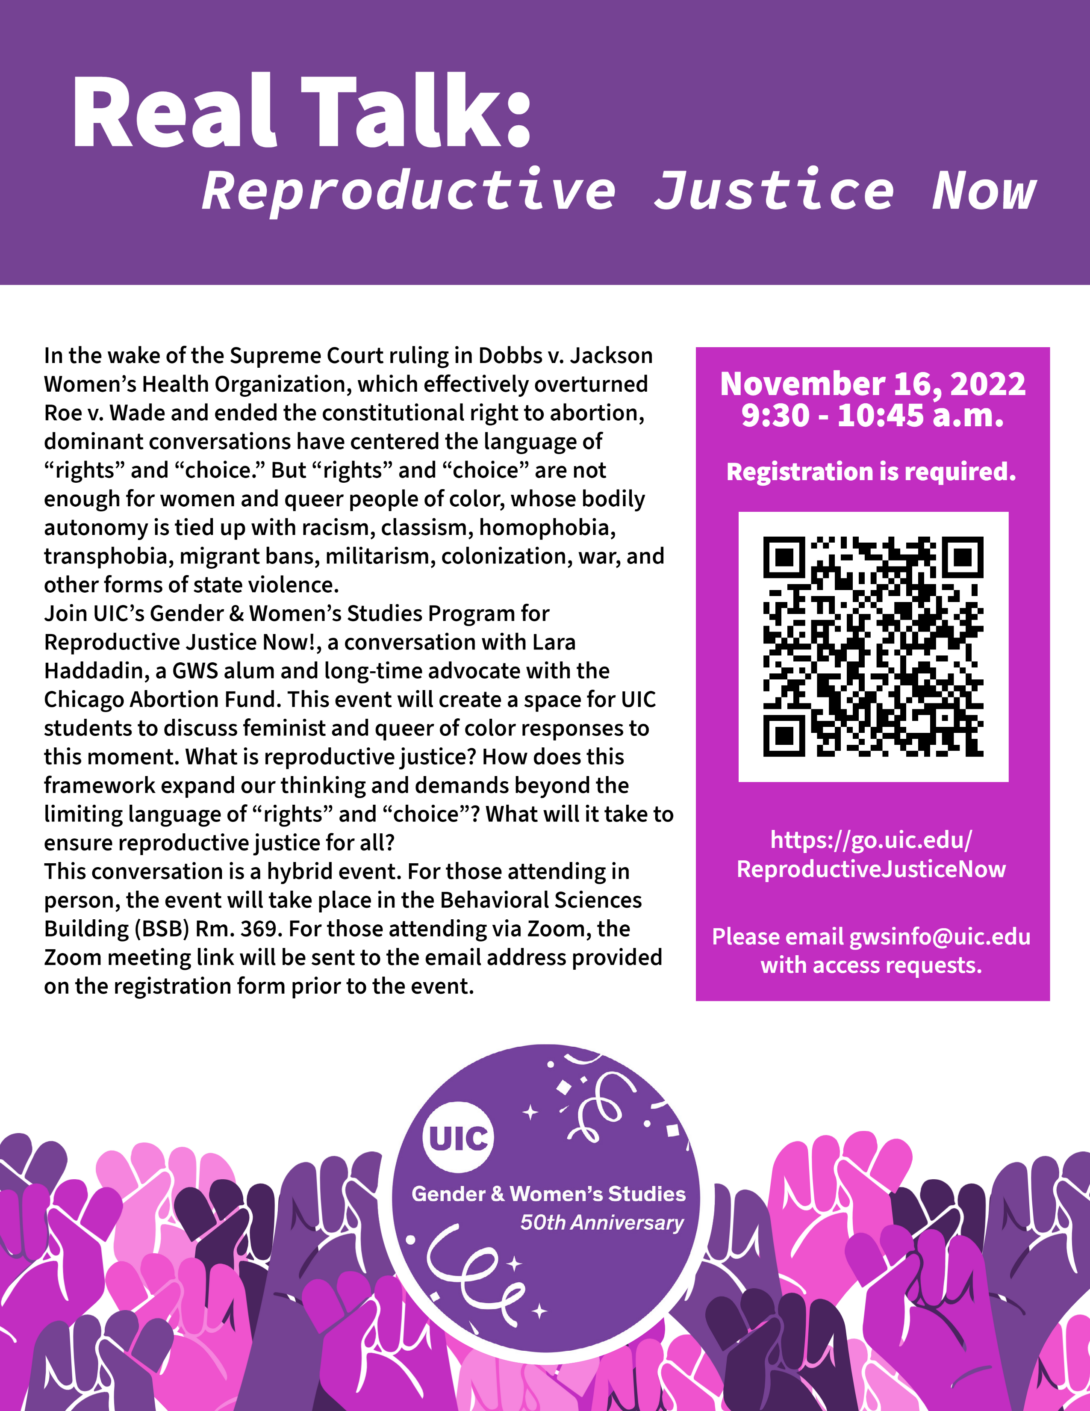 Event flier that has images of raised fists in shades of purple and pink along the bottom. In the center of the fists is a circular, purple GWS 50th anniversary logo. The center of the flier is white with a block of black text on the left that provides an event description. Along the center right is a vertical pink rectangle that provides event logistics in white text, as well as a QR code for registration. The top of the flier is purple, and the event title is presented in white text.